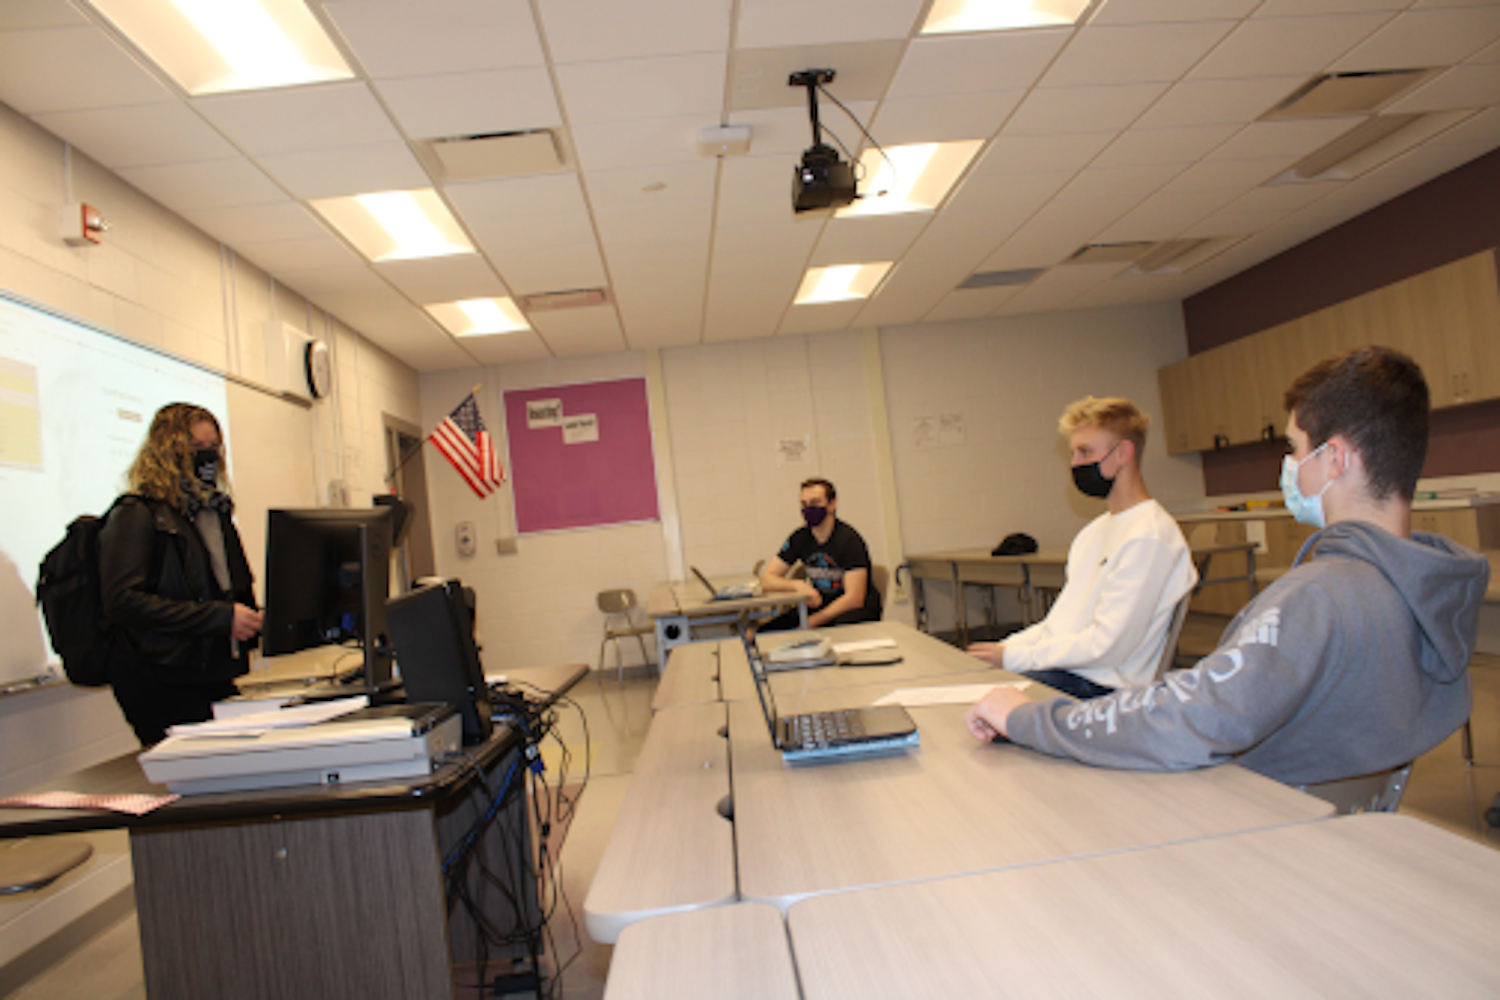 Duanesburg Jr./Sr. High School teacher Rebecca Pless discusses a novel with her students during a College in the High School (CHS) English 123 College Composition class. Clockwise from the left are Pless, Frankie Milos, Nicholas Perillo, and Matthew Coons.